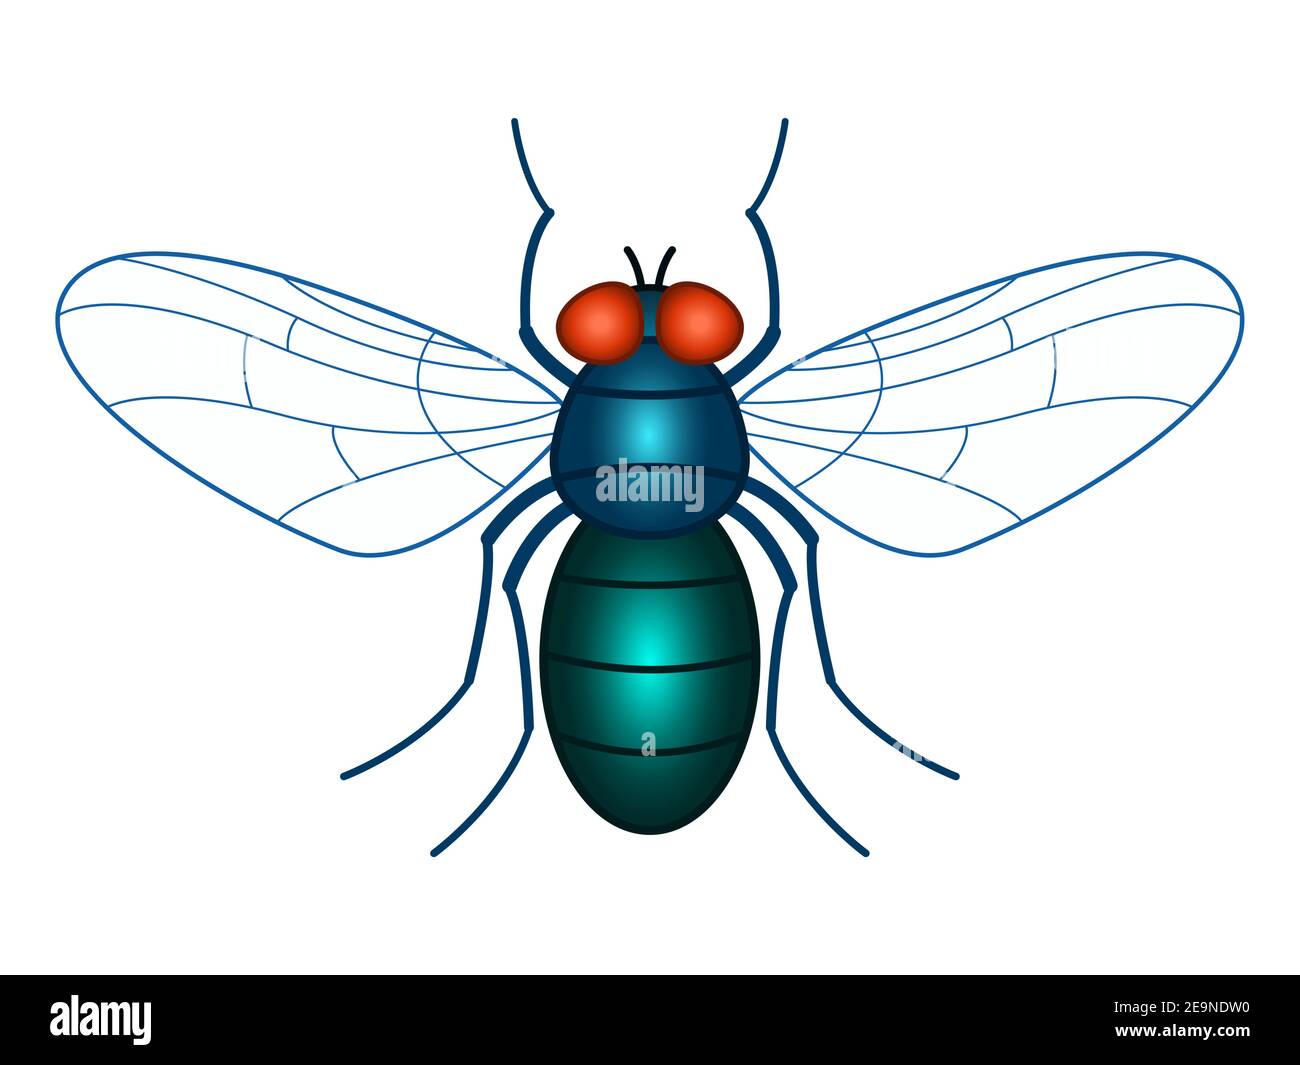 Illustration of the fly insect Stock Vector